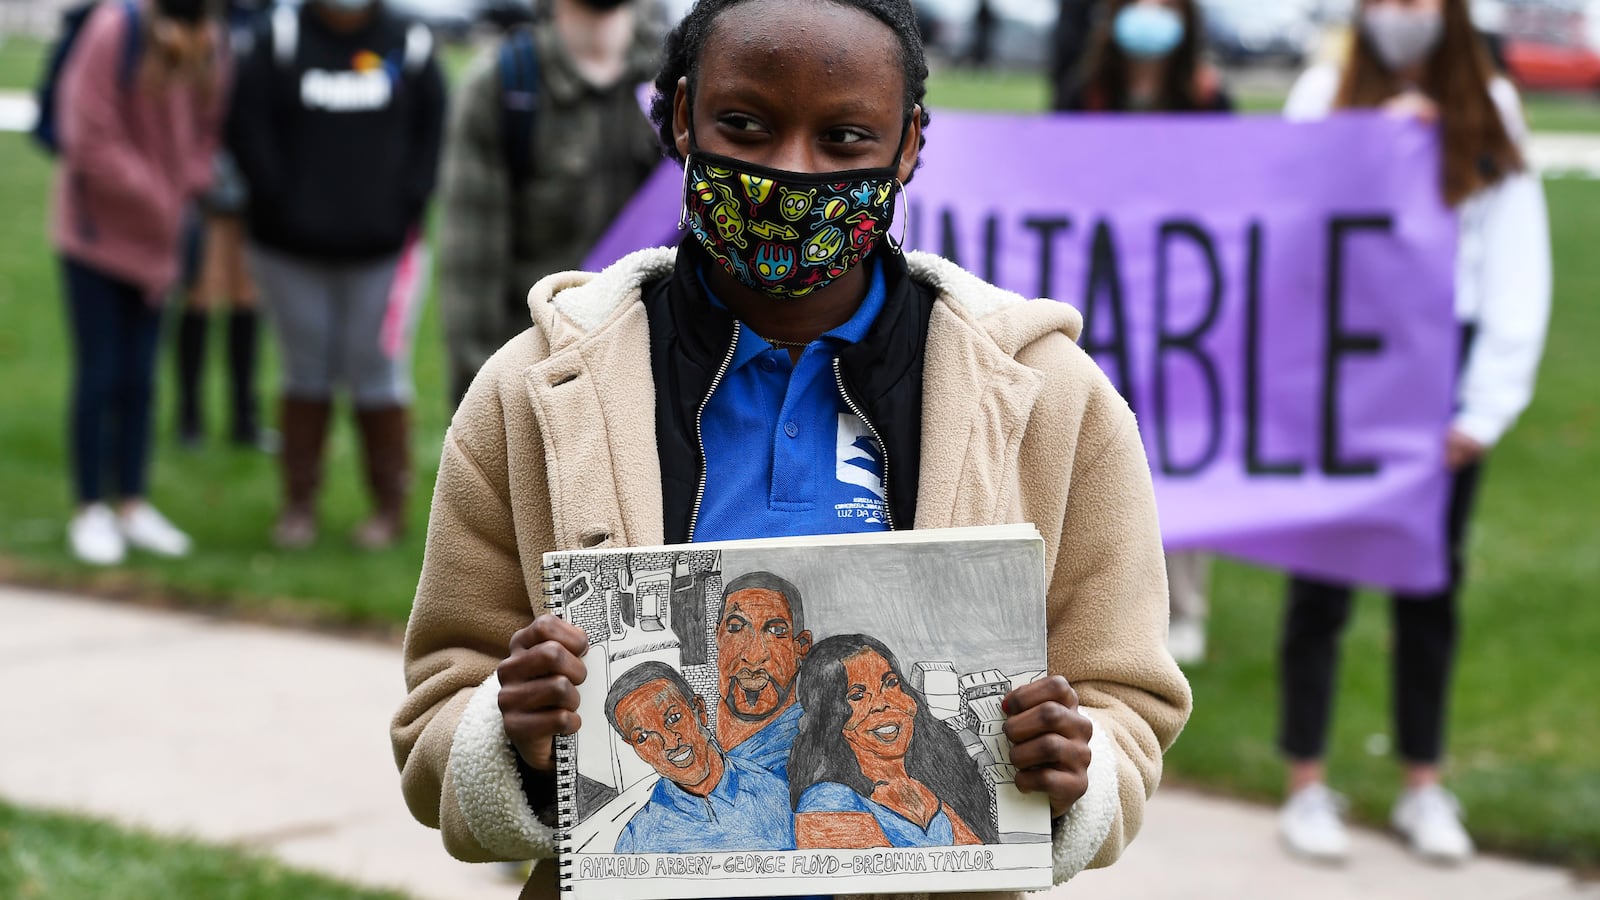 A young woman wearing a cream colored jacket, blue shirt and cloth mask holds a drawing of Ahmaud Arbery, George Floyd and Breonna Taylor. Students hold a purple banner behind her.